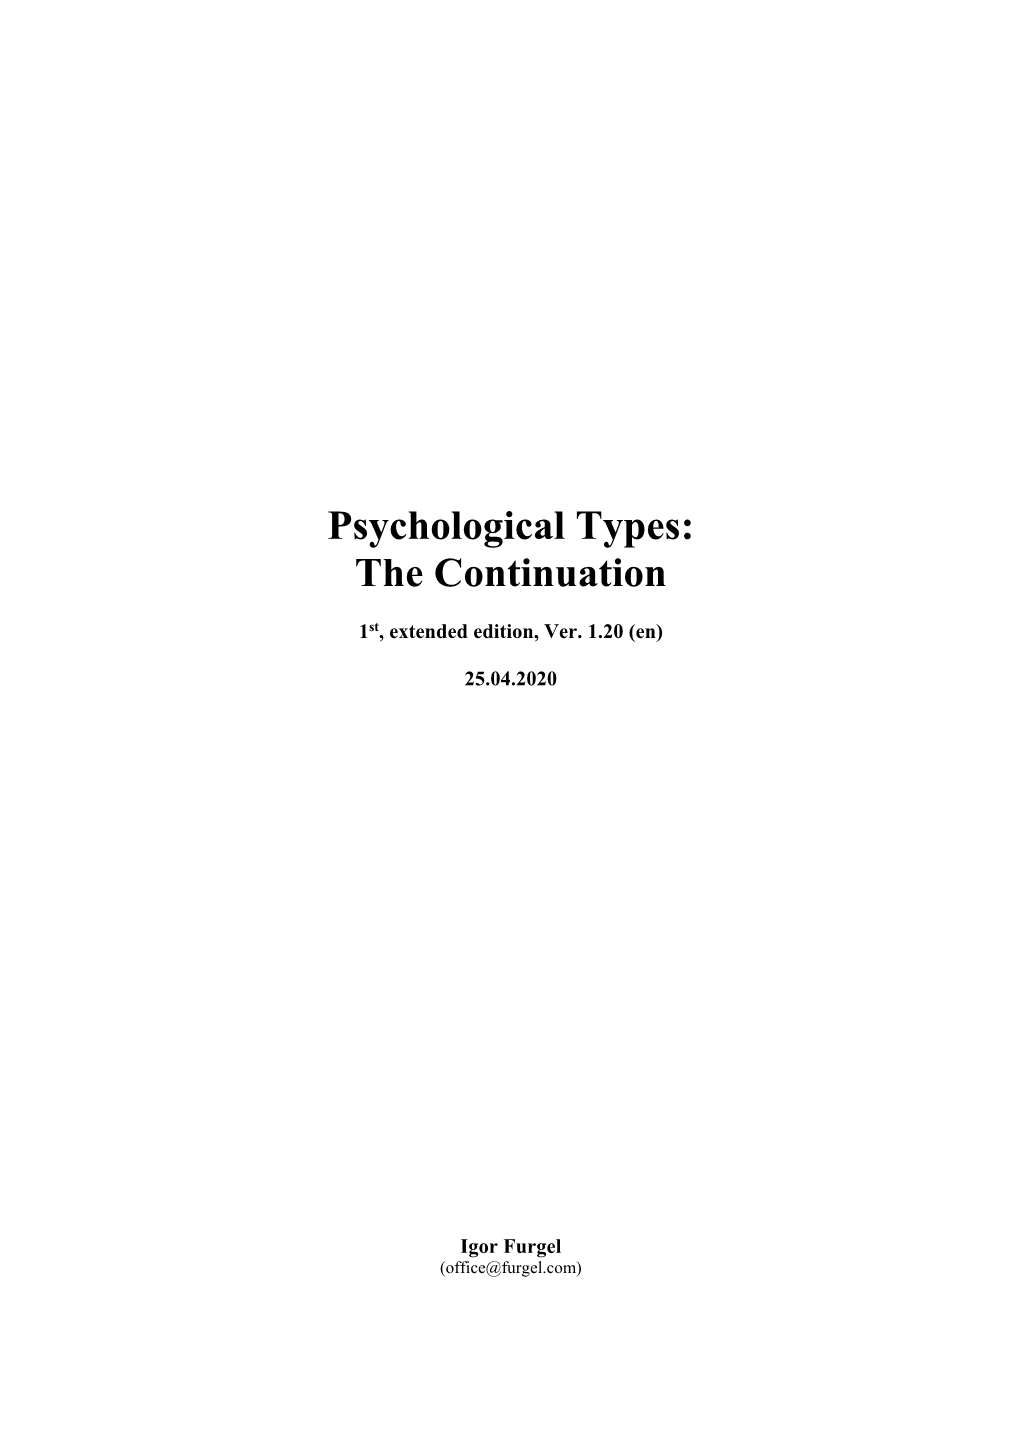 Psychological Types: the Continuation